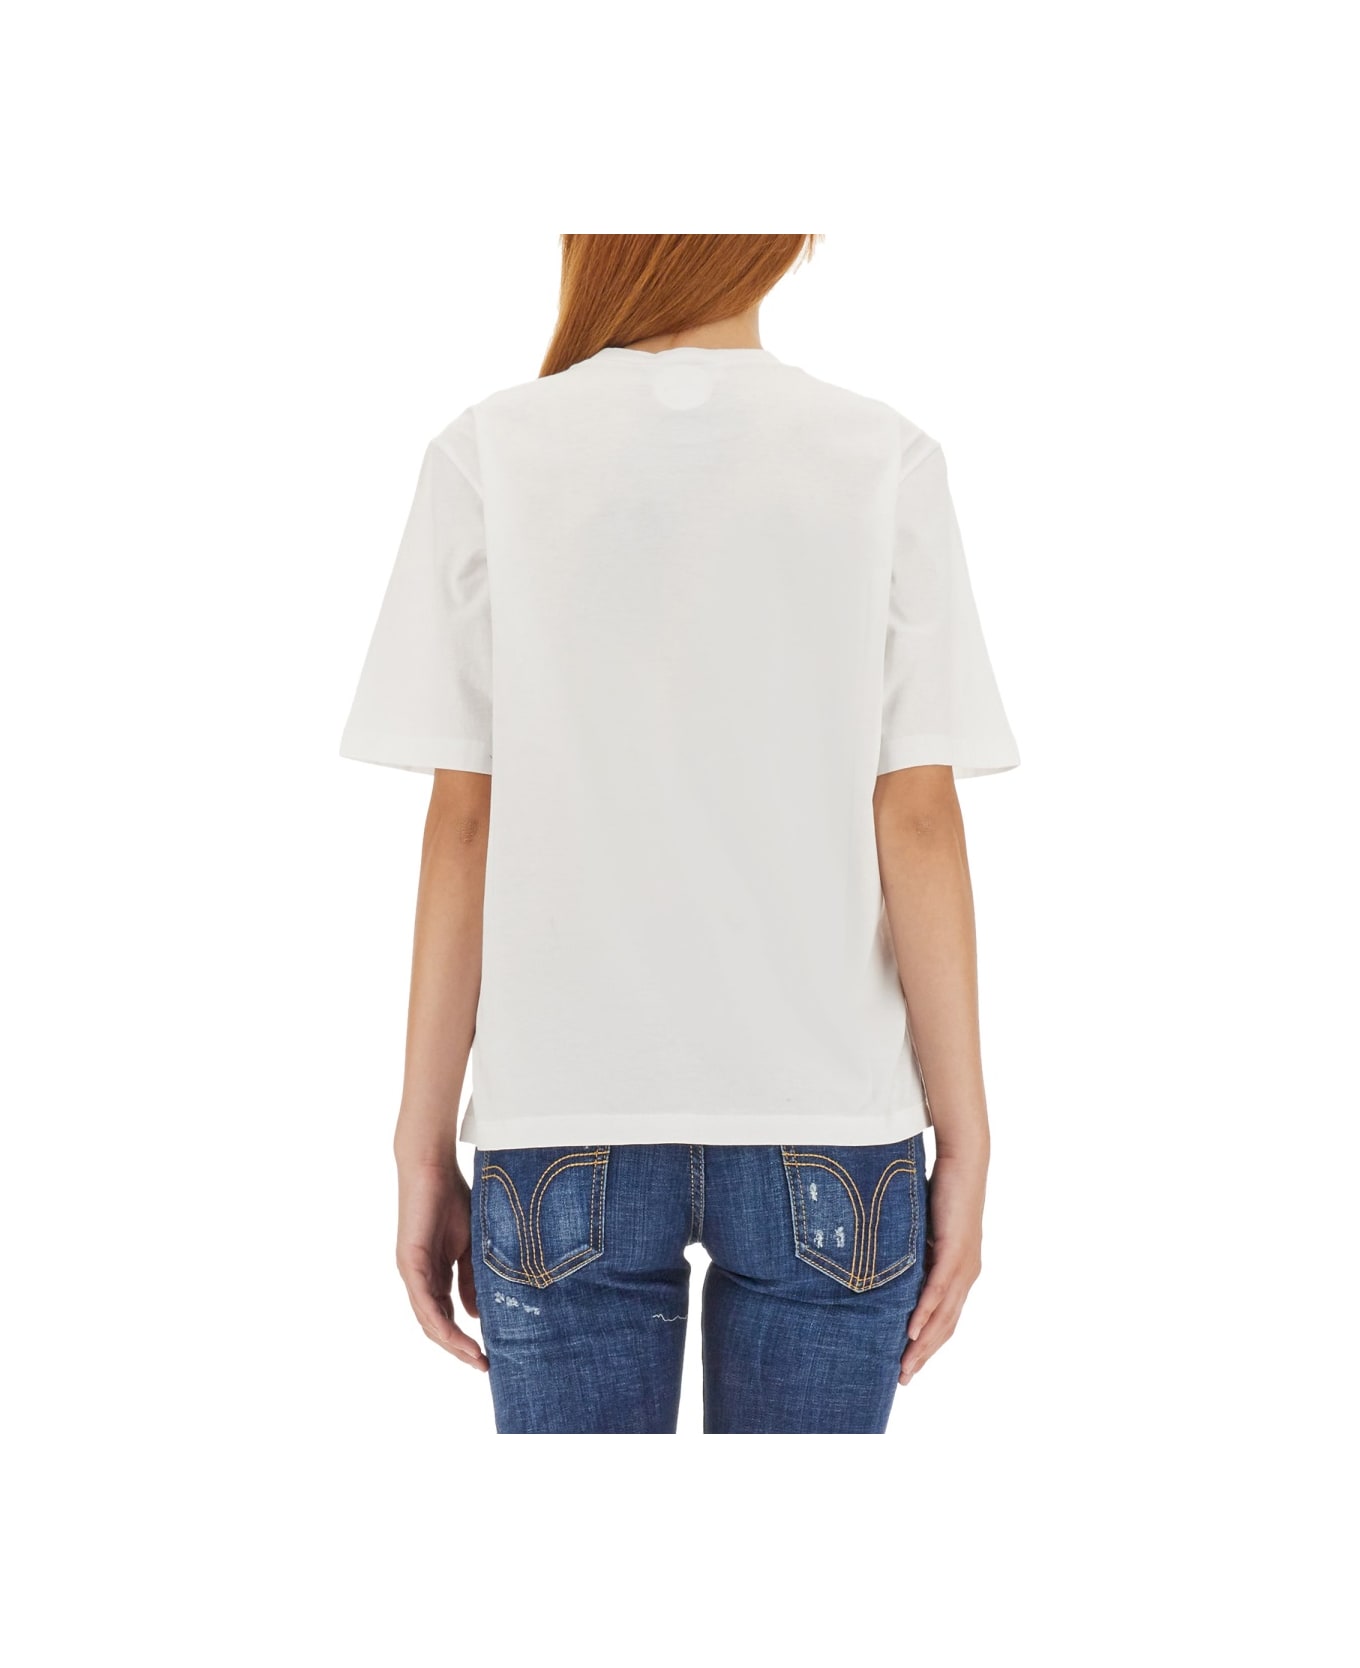 Dsquared2 Easy Fit T-shirt - WHITE Tシャツ